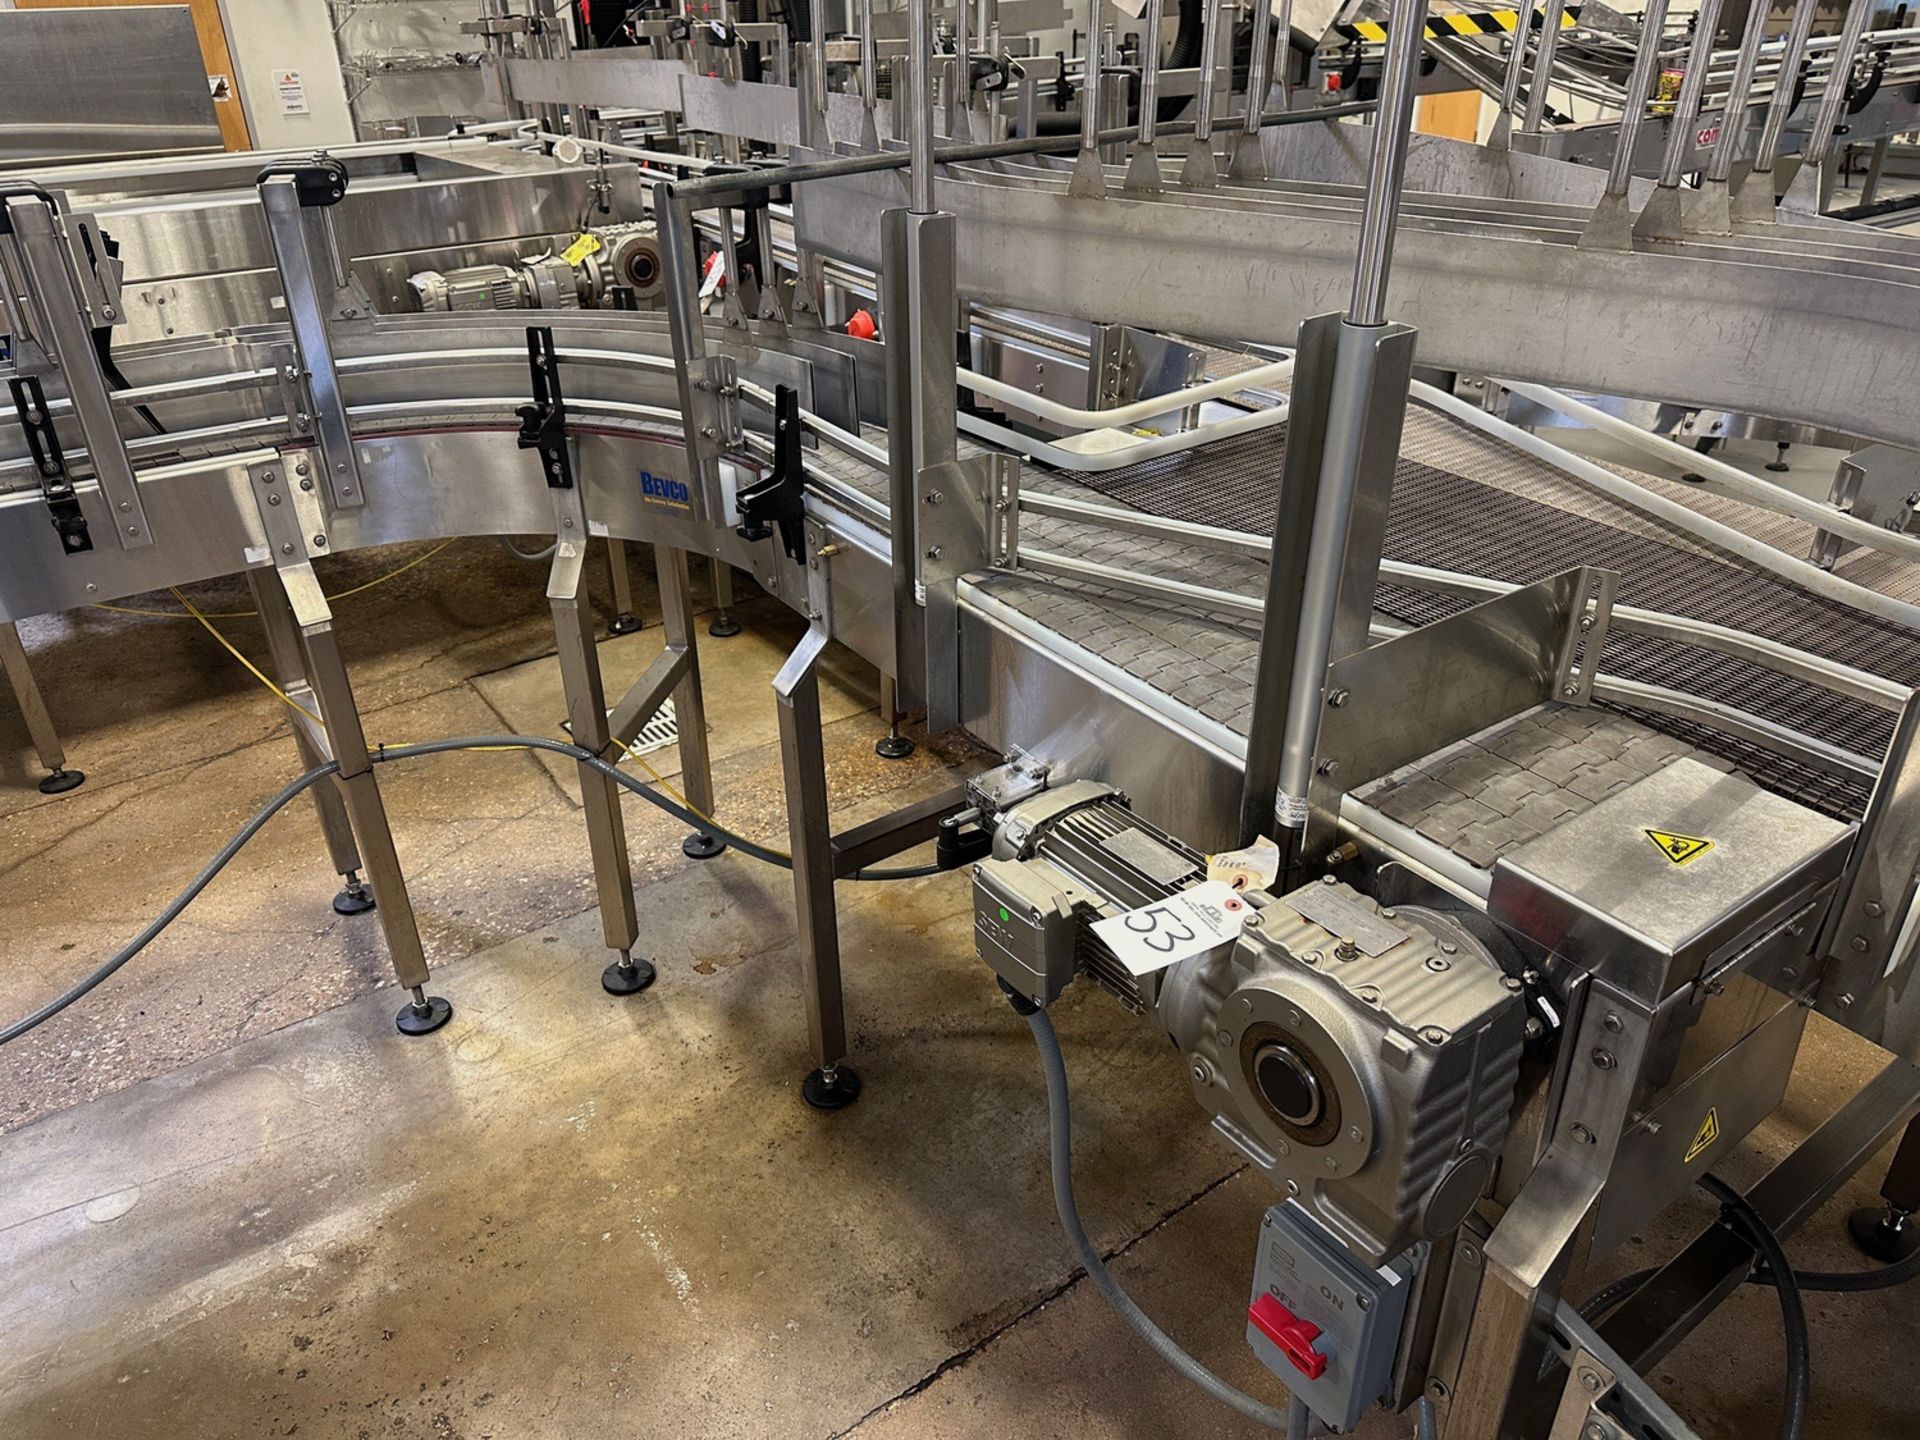 Bevco Conveyor over Stainless Steel Frame (Approx. (4) 3.25" Belts x 16' with 90 Degree Turn)